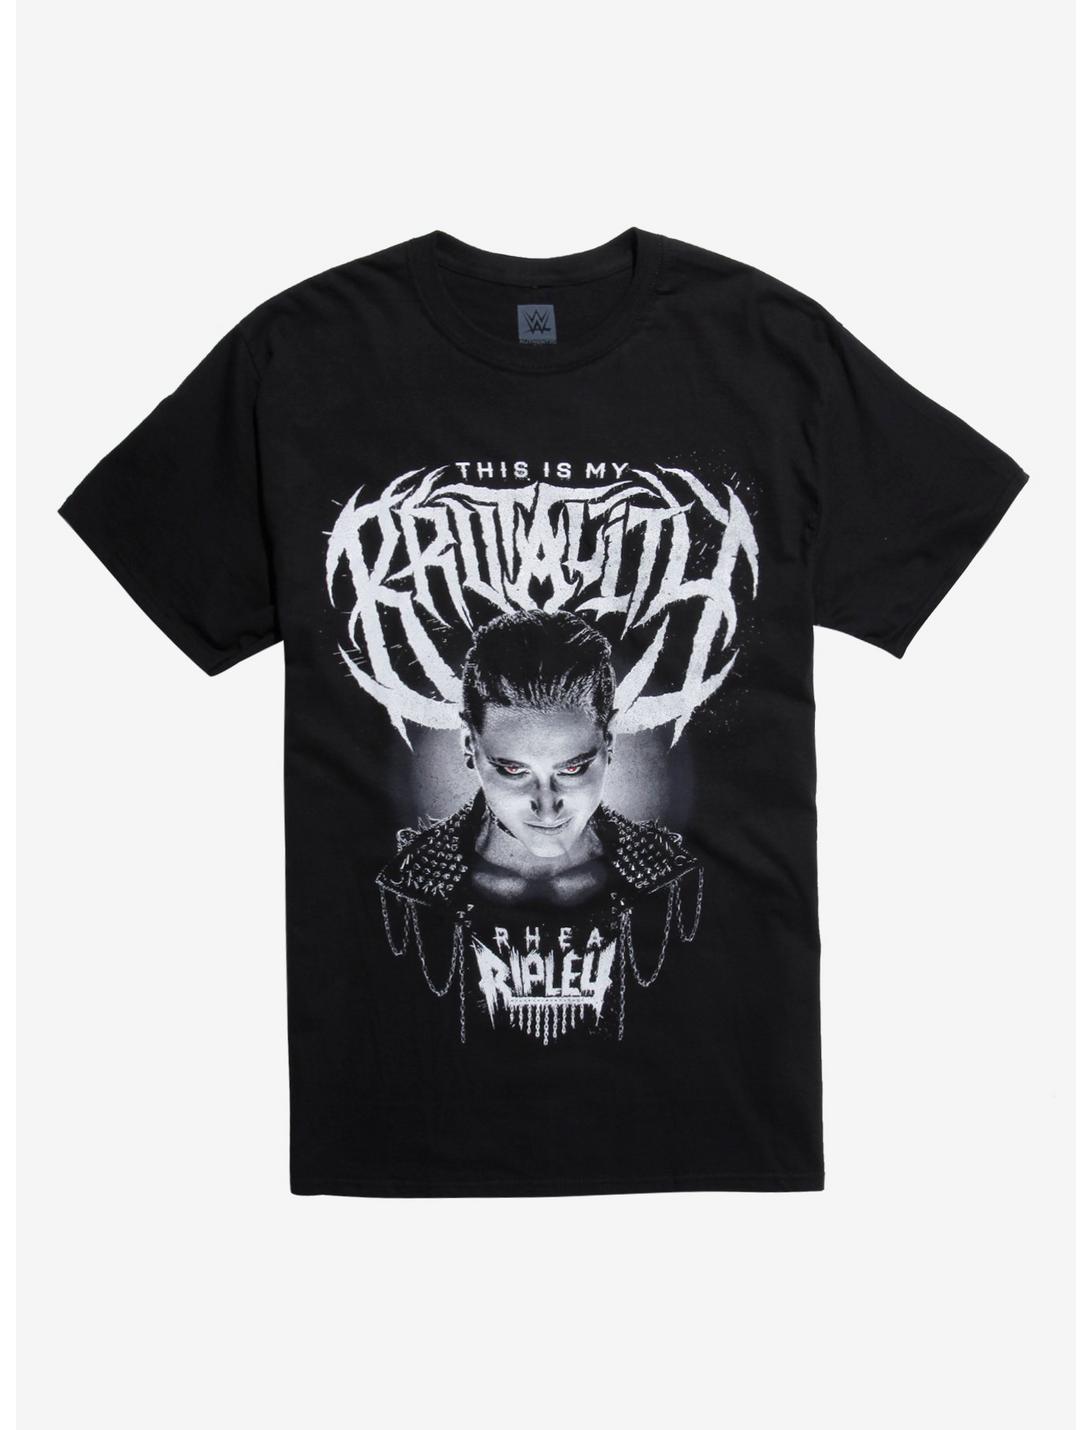 WWE RHEA RIPLEY This Is My Brutality OFFICIAL AUTHENTIC T-SHIRT 